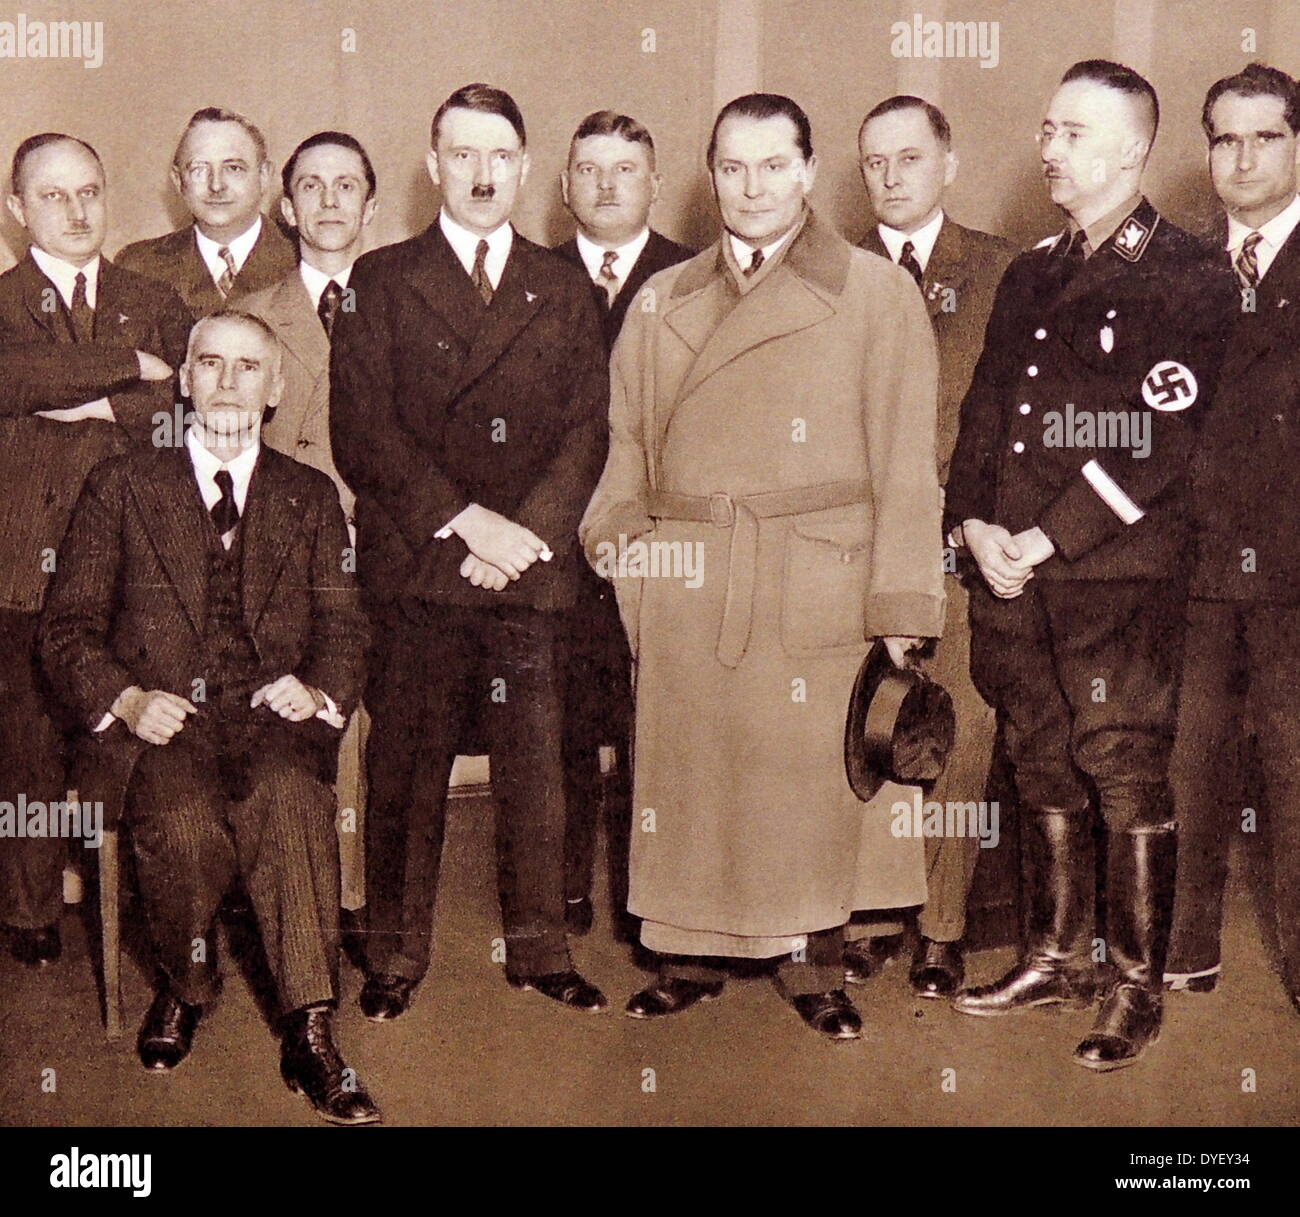 From Left to right: Nazi leaders photographed in 1933; Justice Minister Kerri, Josef Goebbels, Adolf Hitler, Ernst Roehm; Herman Goring, Minister Darre, Heinrich Himmler head of the SS, Deputy Fuhrer Rudolf Hess, Finace Minister Frick Stock Photo